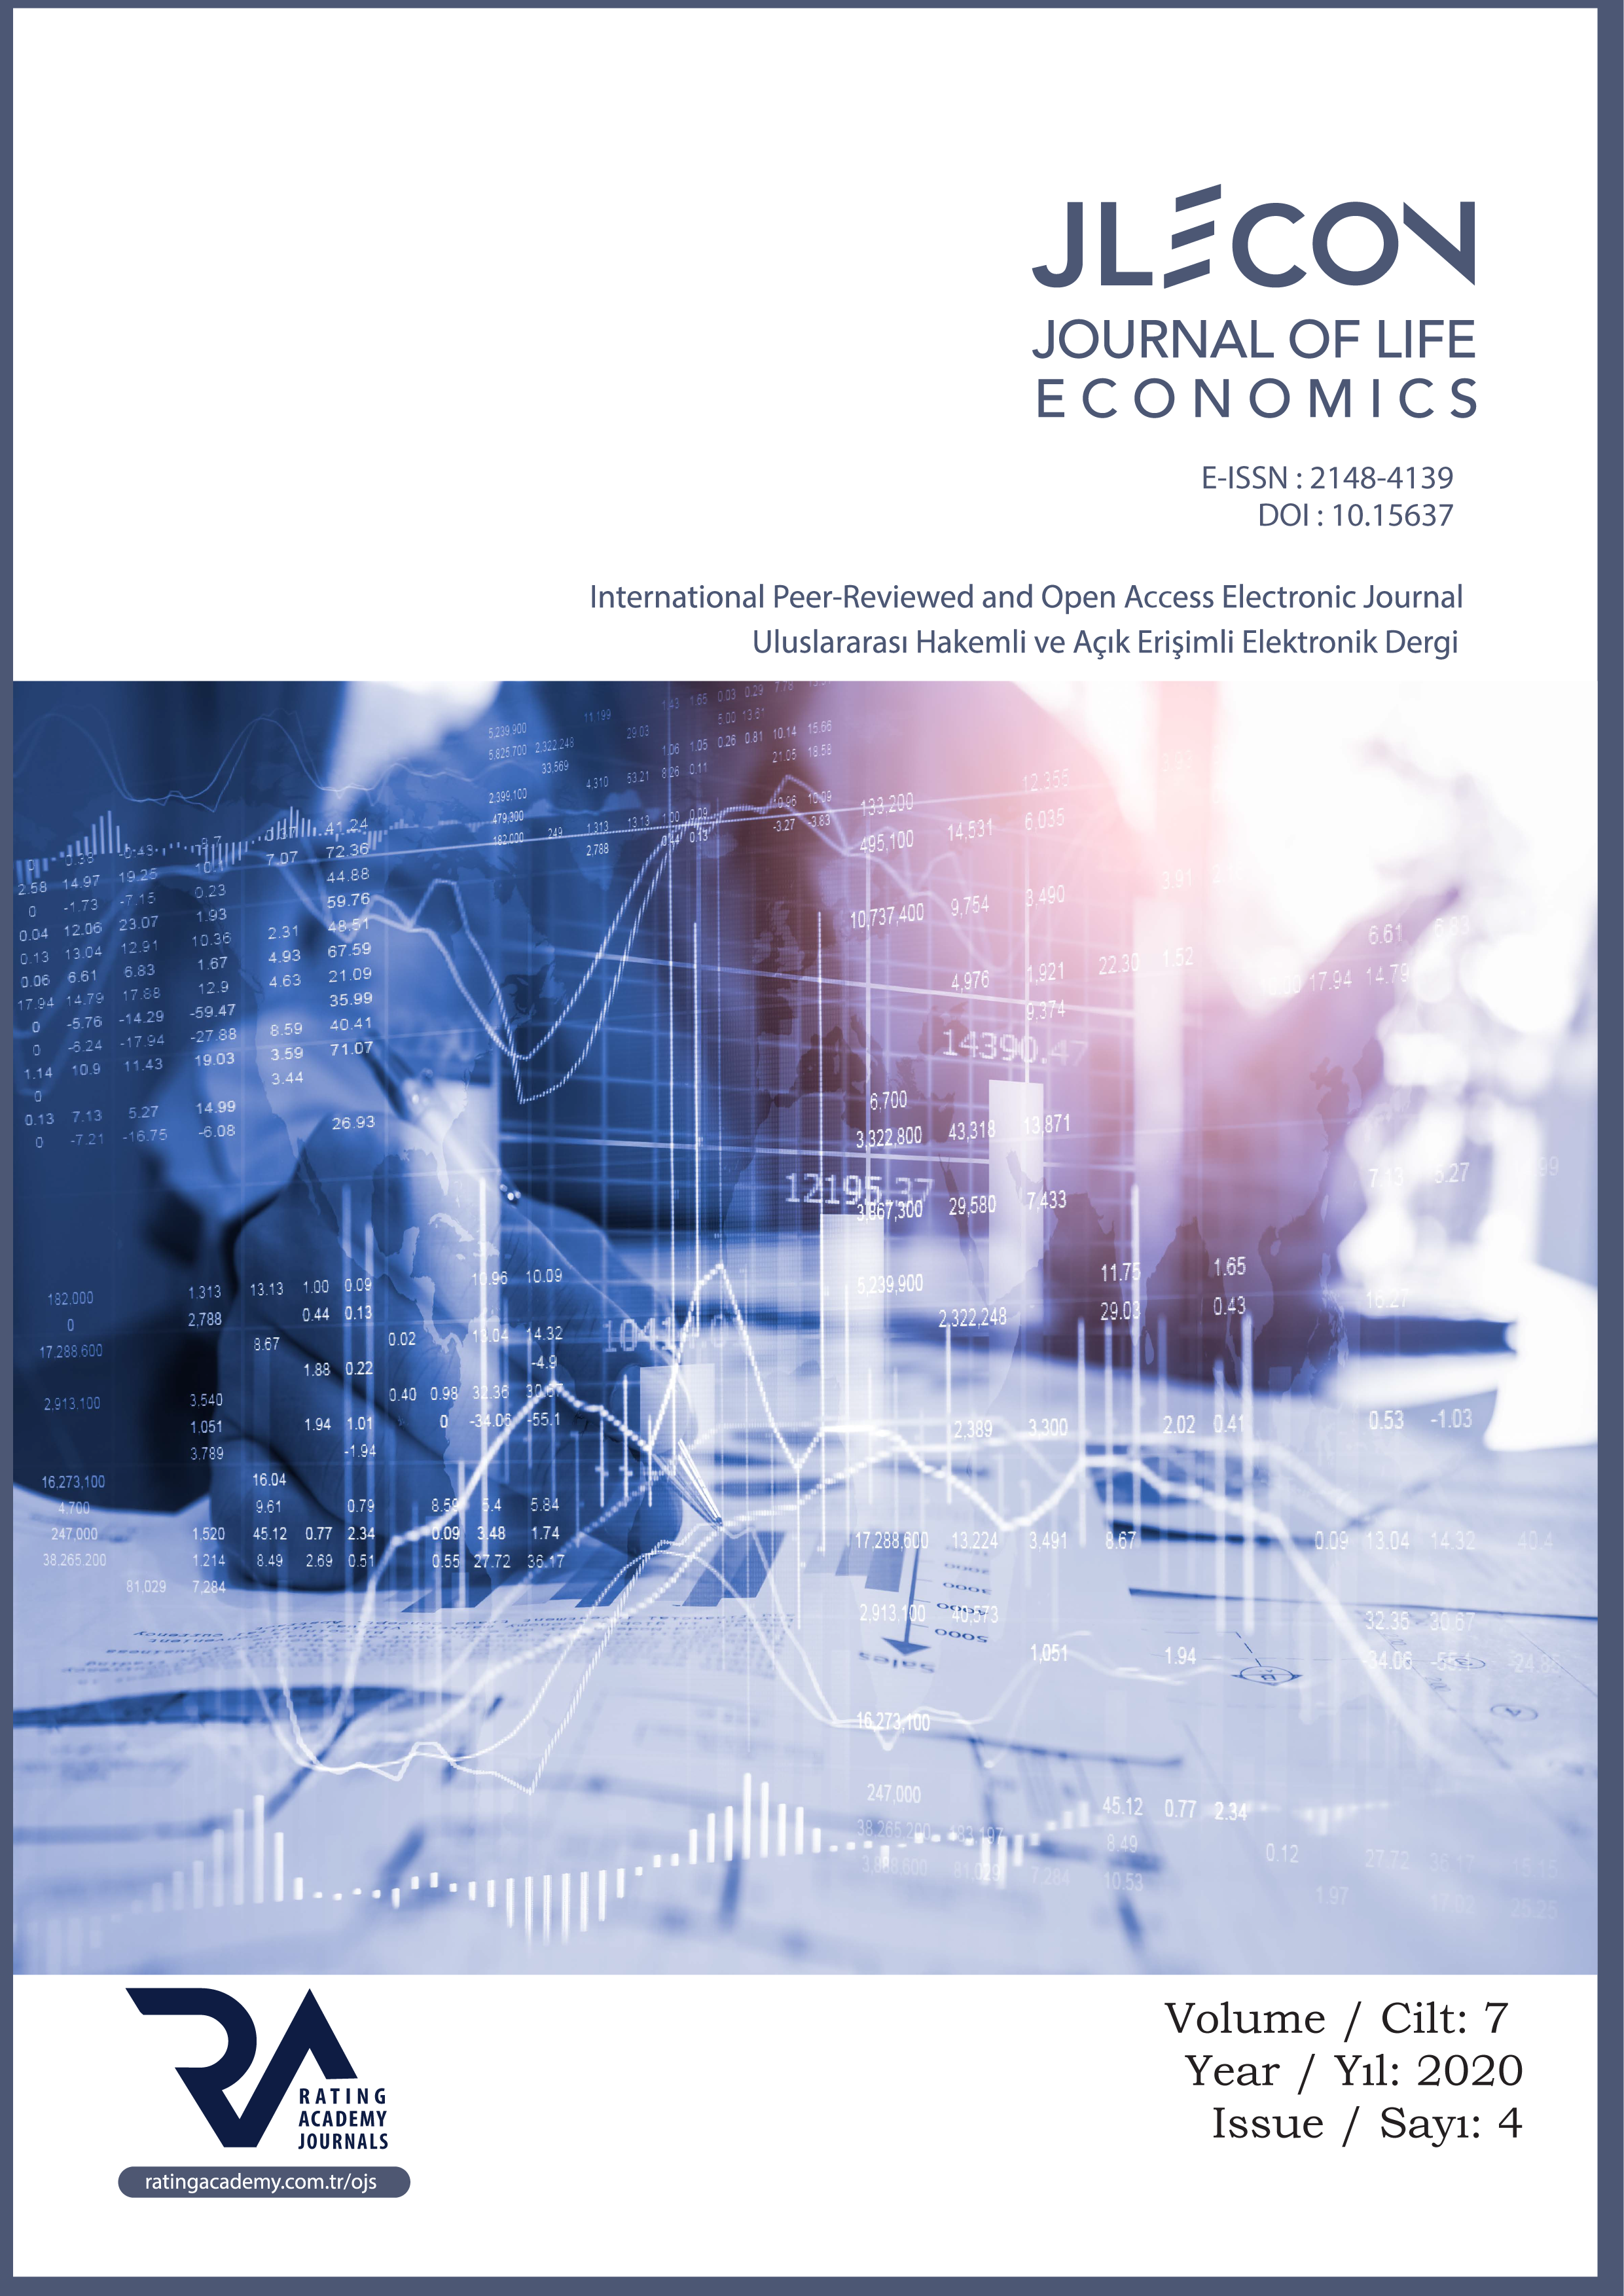 THE EFFECT OF INFORMATION AND COMMUNICATION TECHNOLOGIES ON LABOR EFFICIENCY IN OECD COUNTRIES Cover Image